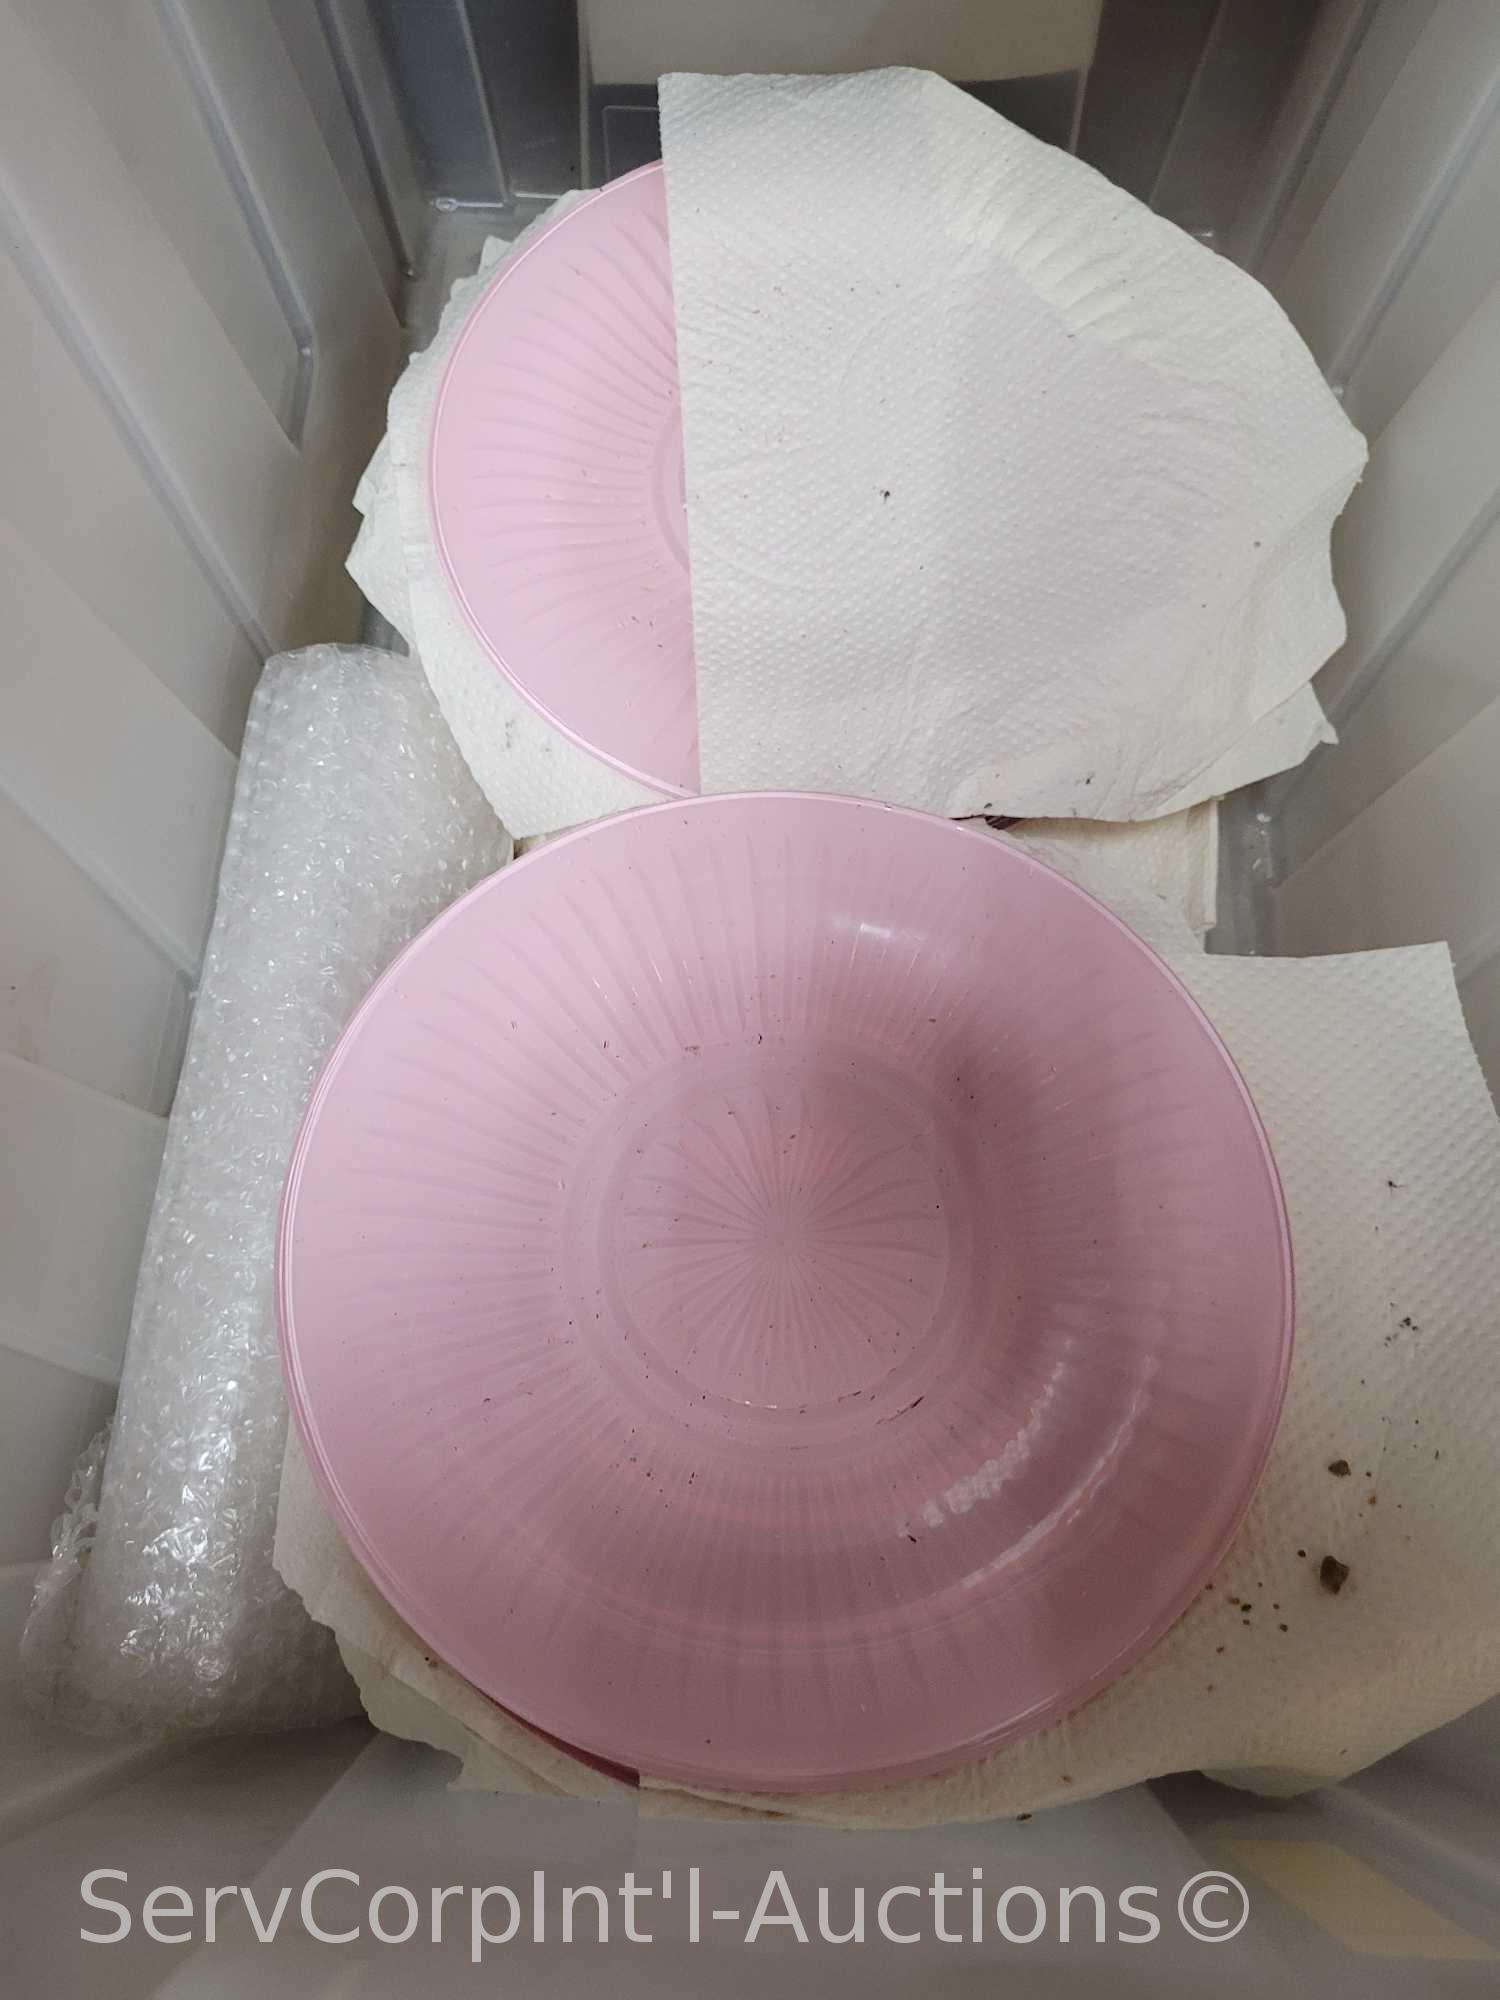 Lot on 2 Shelves of Various Bowls, Christmas Plates, Pink Plates, Saucers (Seller: St. Tammany